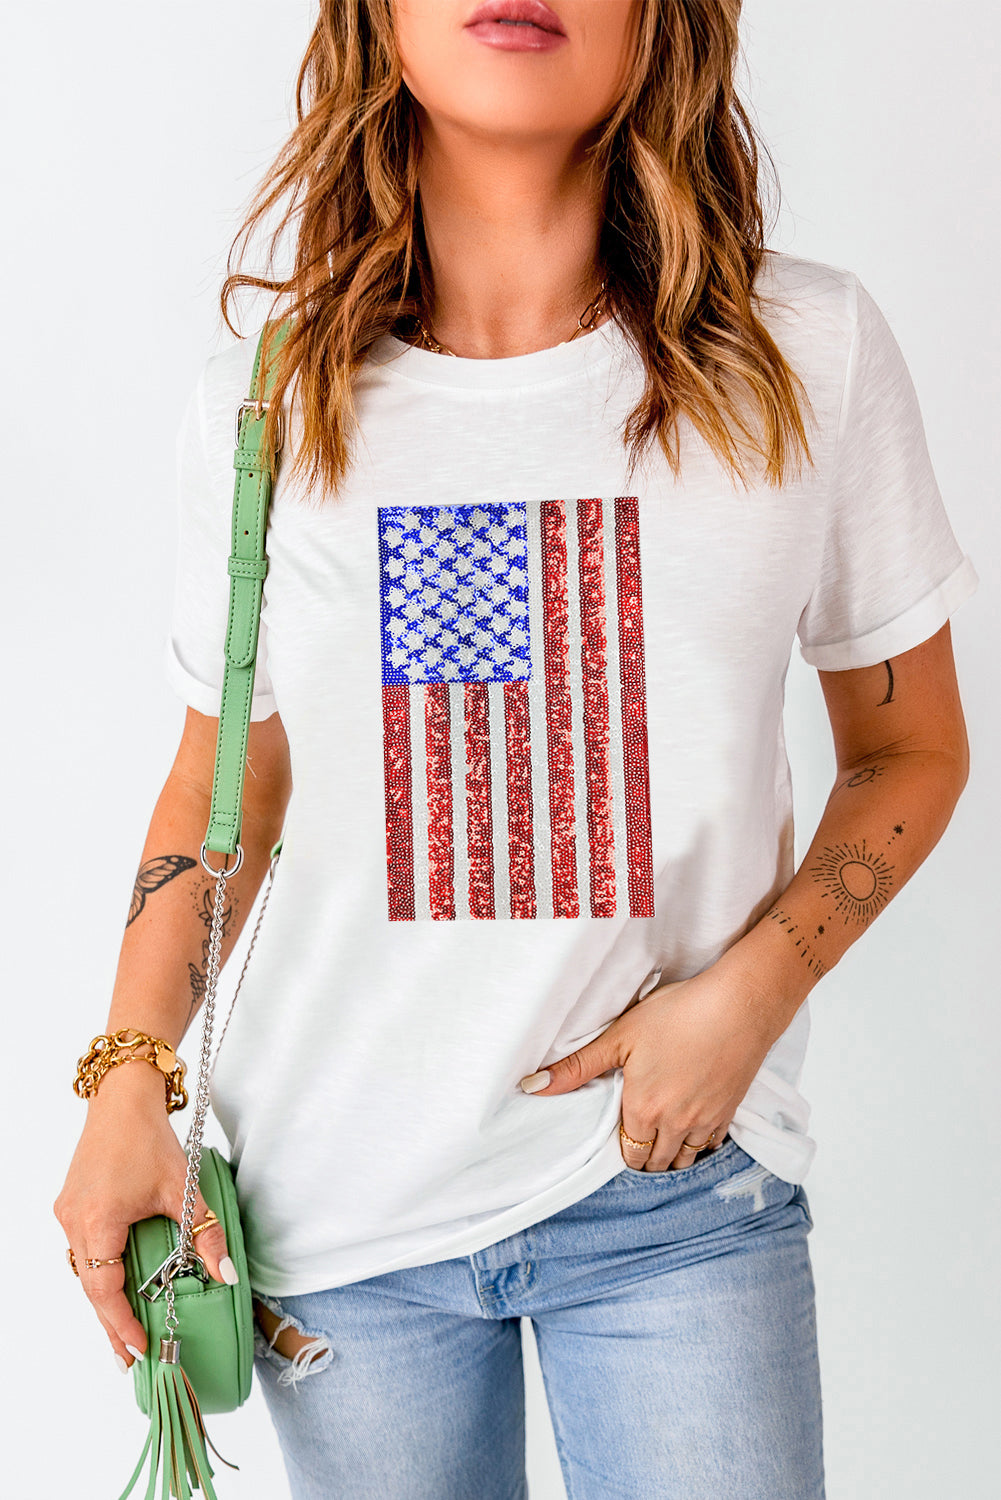 White Shimmery Flag Graphic Tee Graphic Tees JT's Designer Fashion